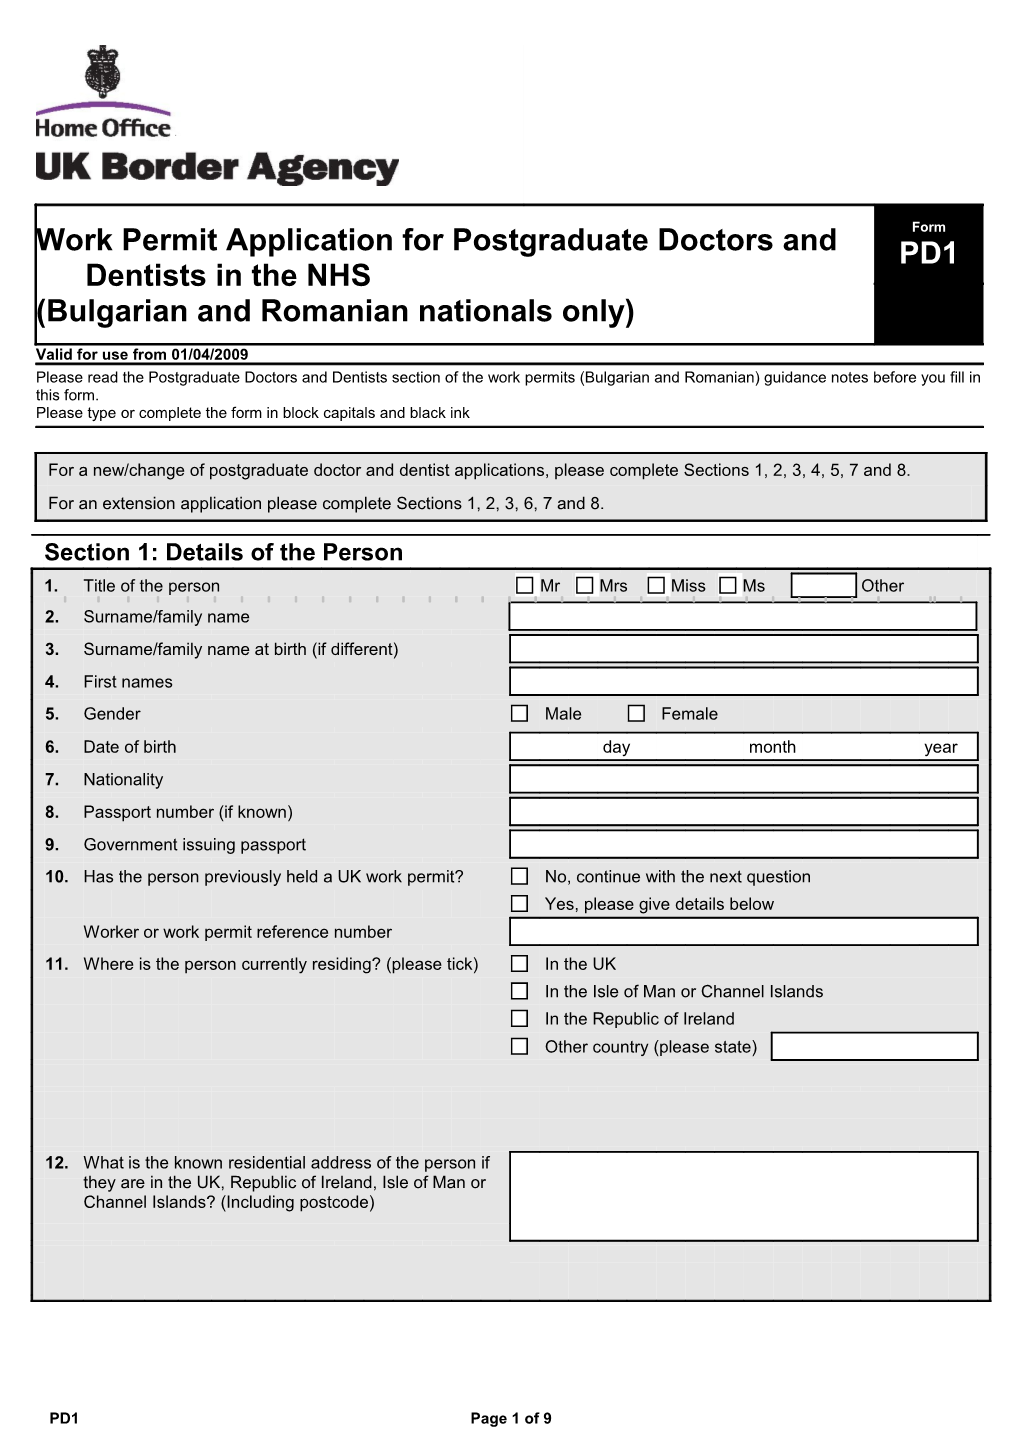 Work Permit Application for Postgraduate Doctors and Dentists in the NHS